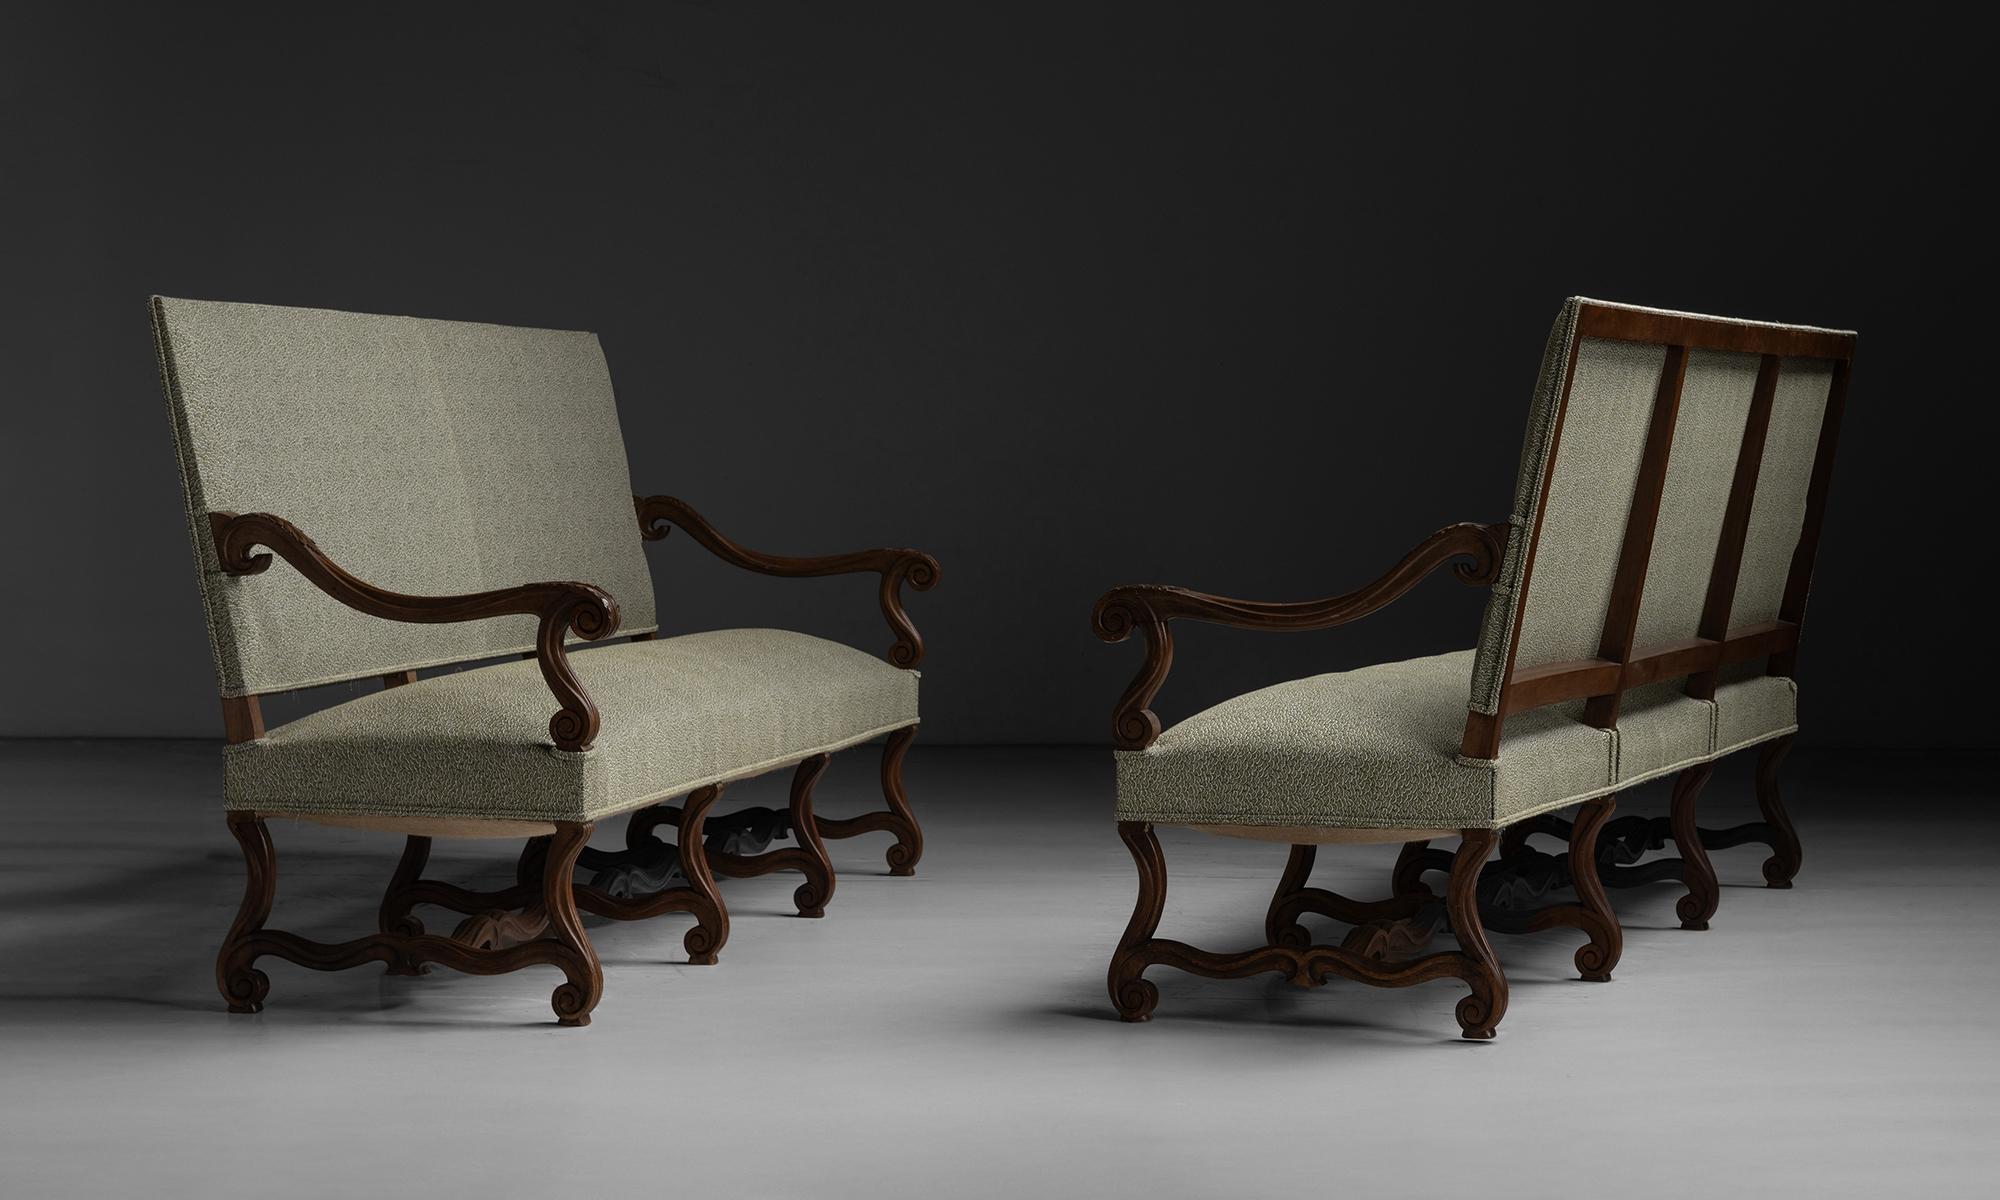 French Os de Mouton Benches in Pierre Frey Linen, France Circa 1890 For Sale